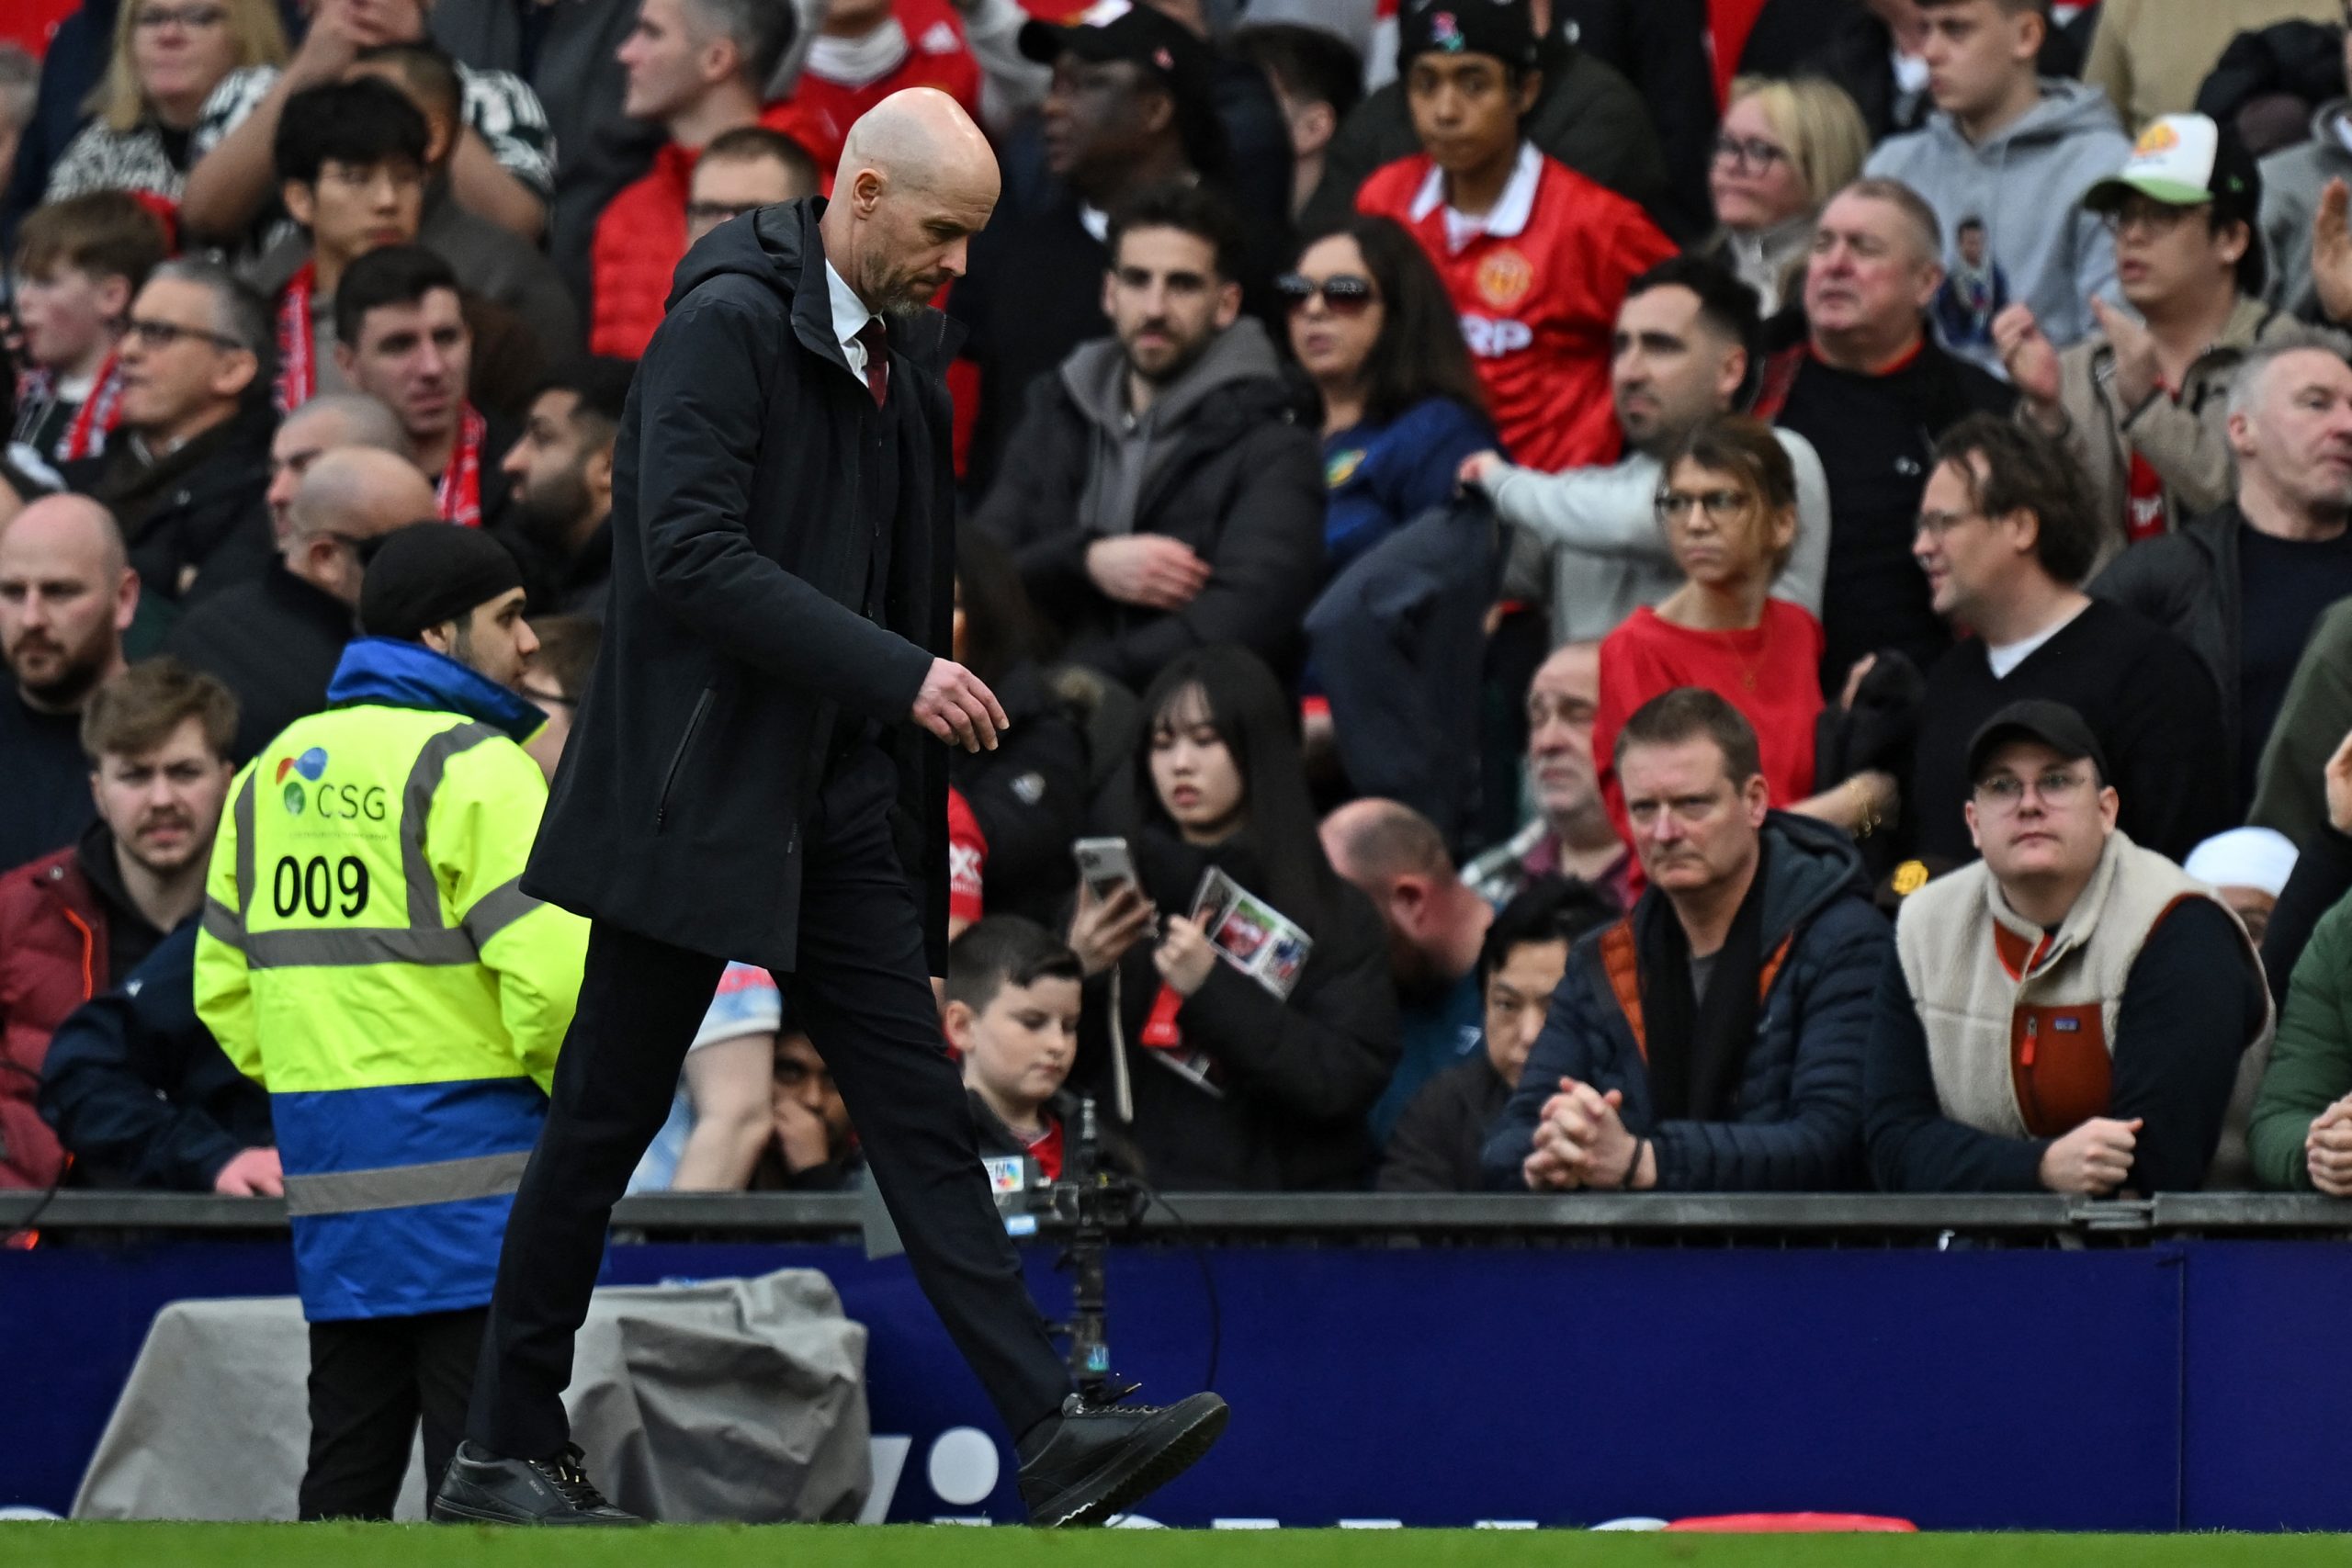 Manchester United v Liverpool: Ten Hag could seal his fate depending on what happens on Sunday .